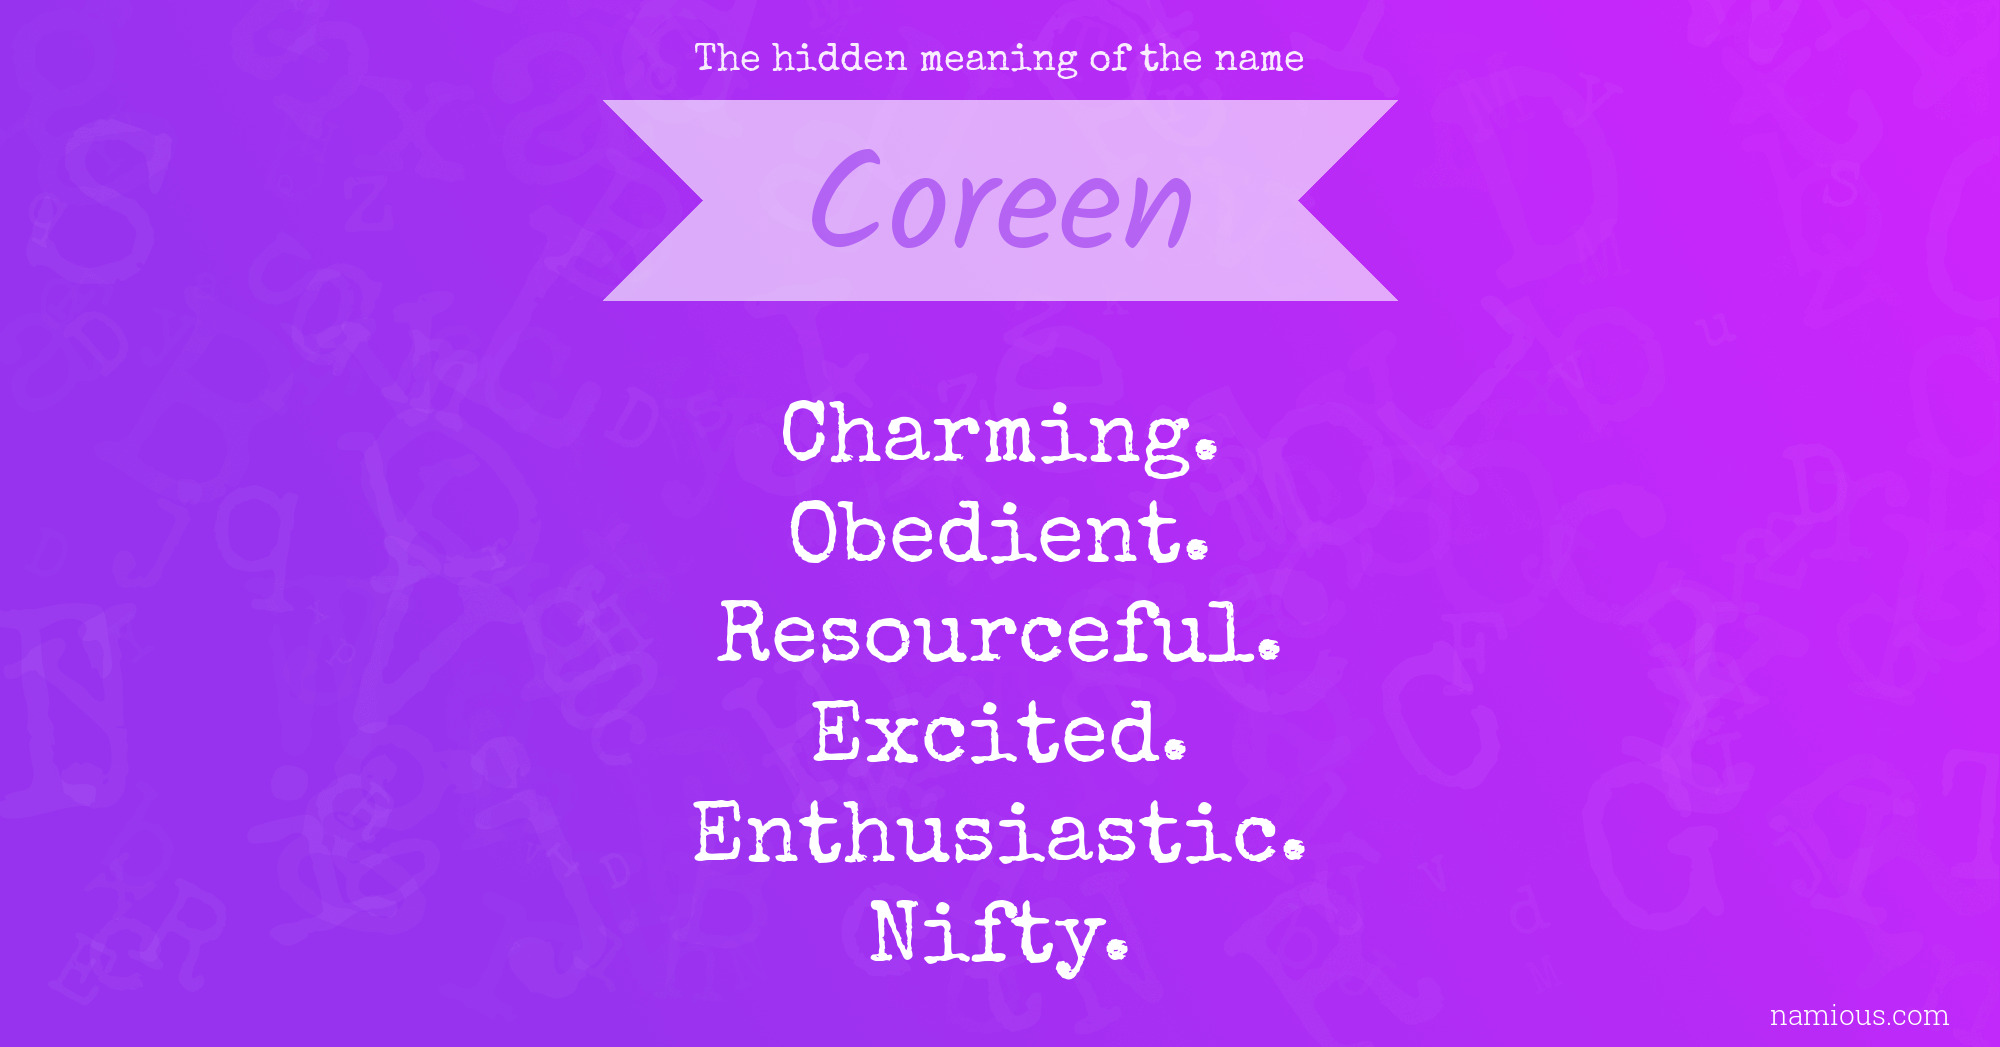 The hidden meaning of the name Coreen